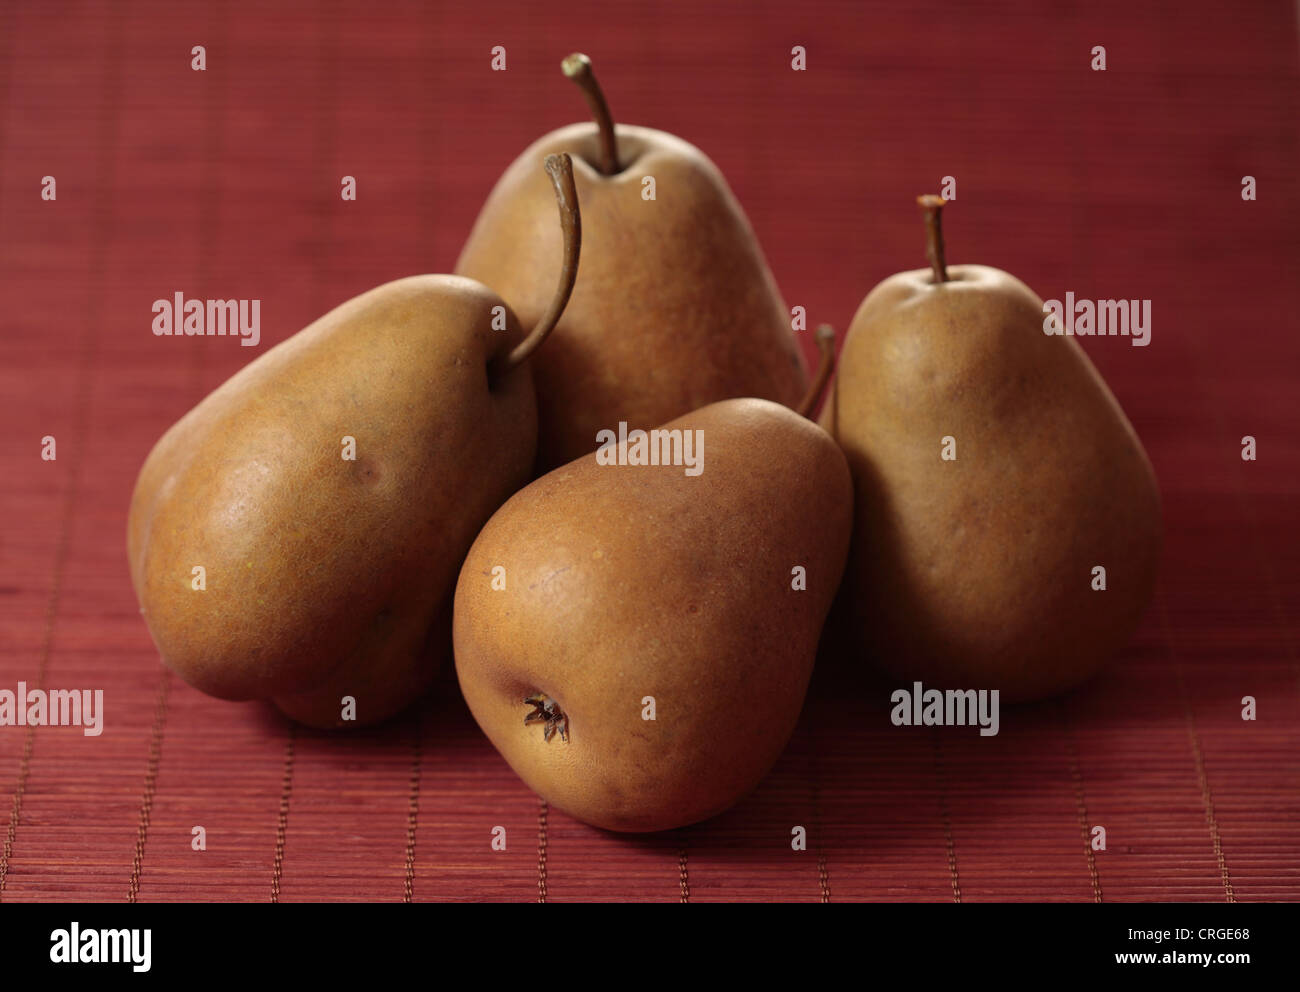 Four pears on red background Stock Photo